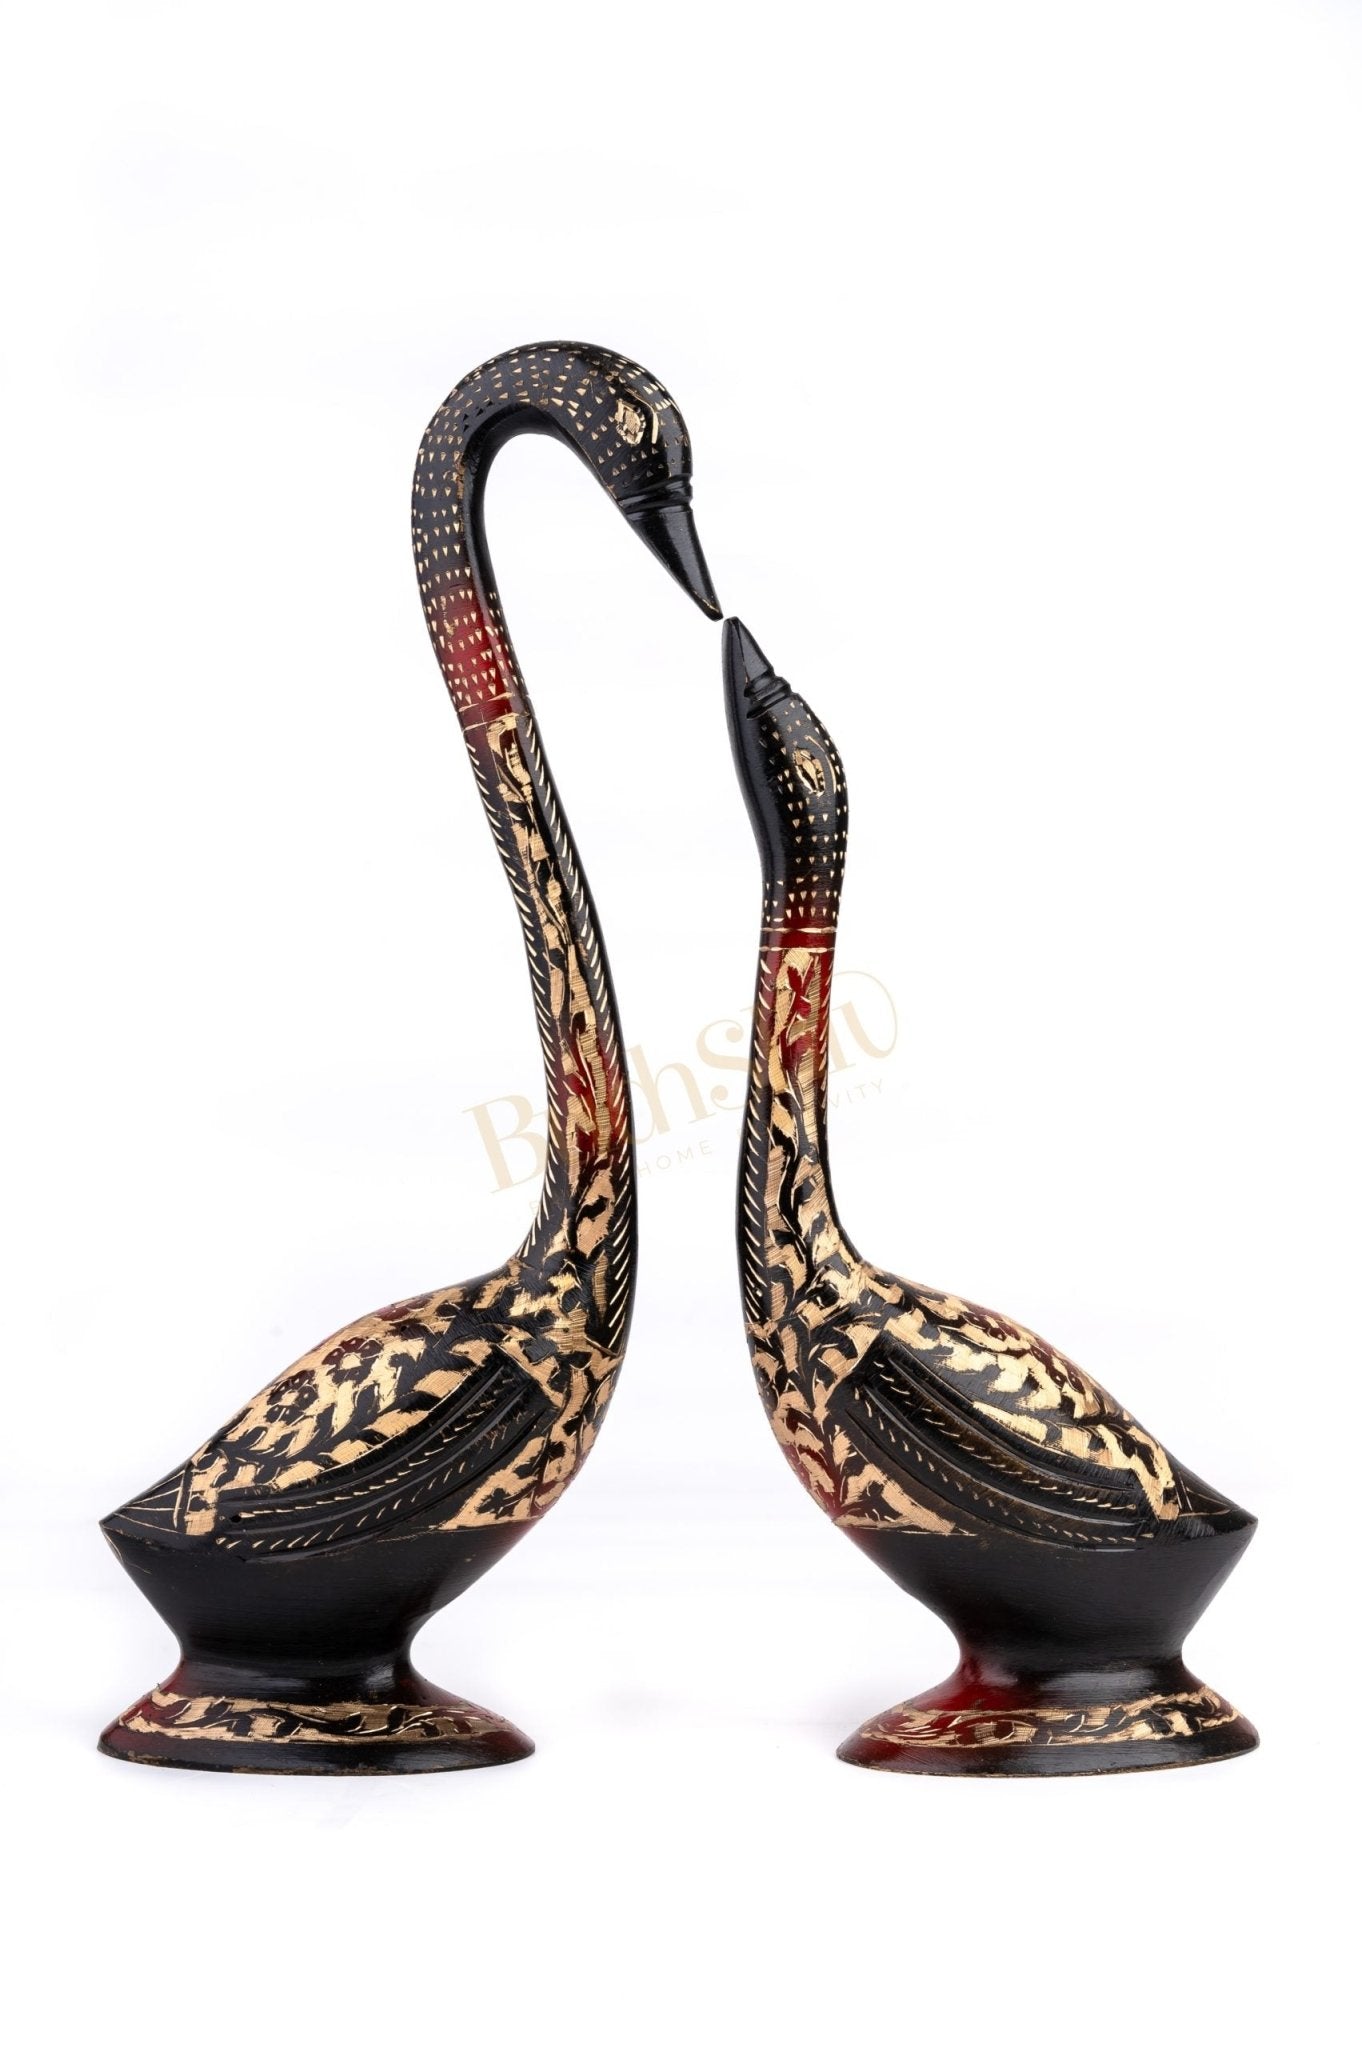 Swan Set of 2 in Brass for Home Decor Office Decor ( Big ) - Budhshiv.com